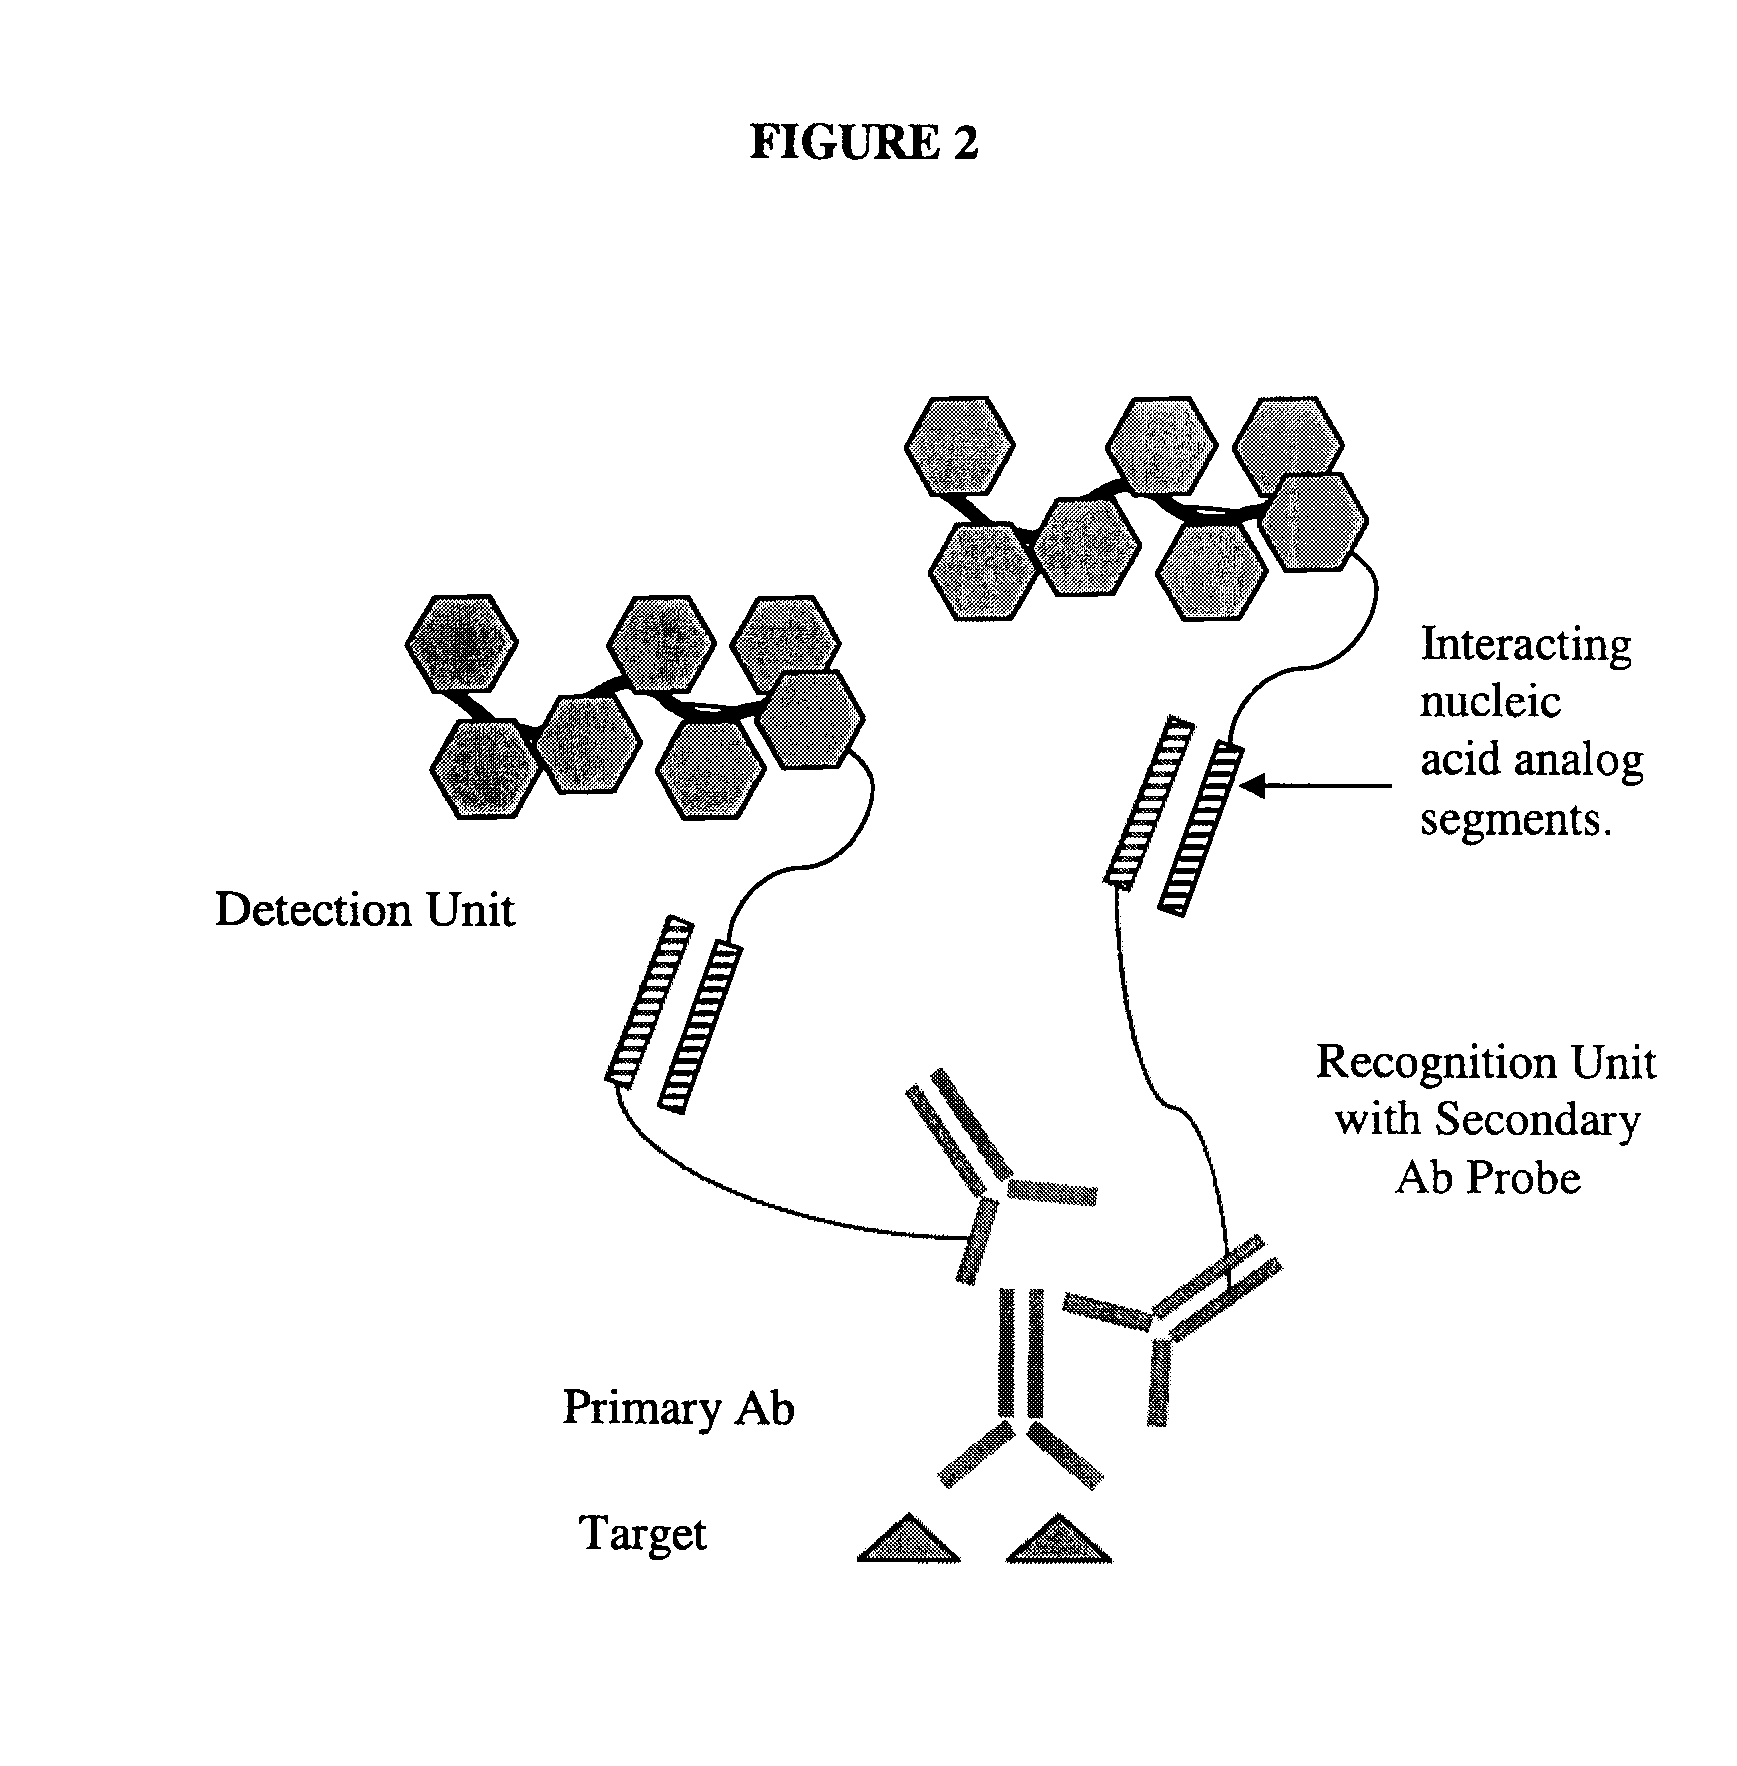 Blocking Agents Comprising Non-Natural Nucleic Acids and Detection Methods Using such Blocking Agents